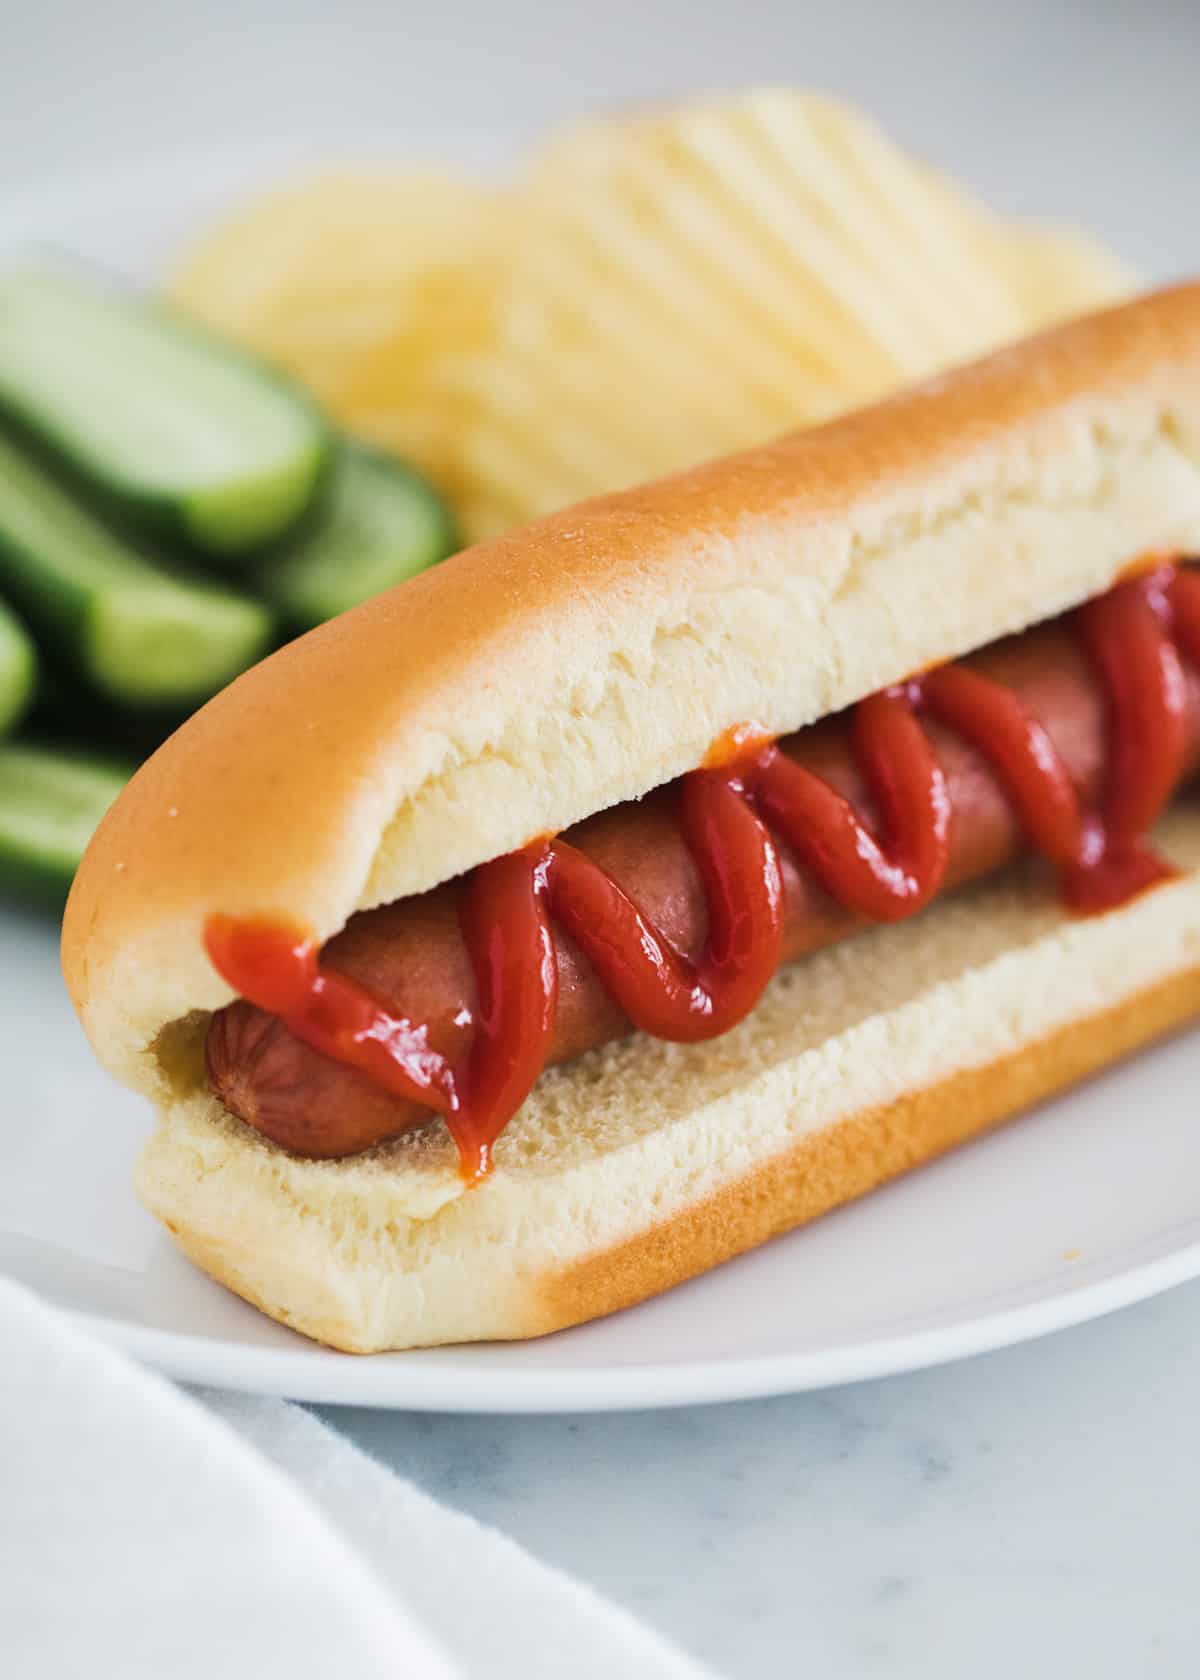 Detail Picture Of Hot Dog Nomer 33